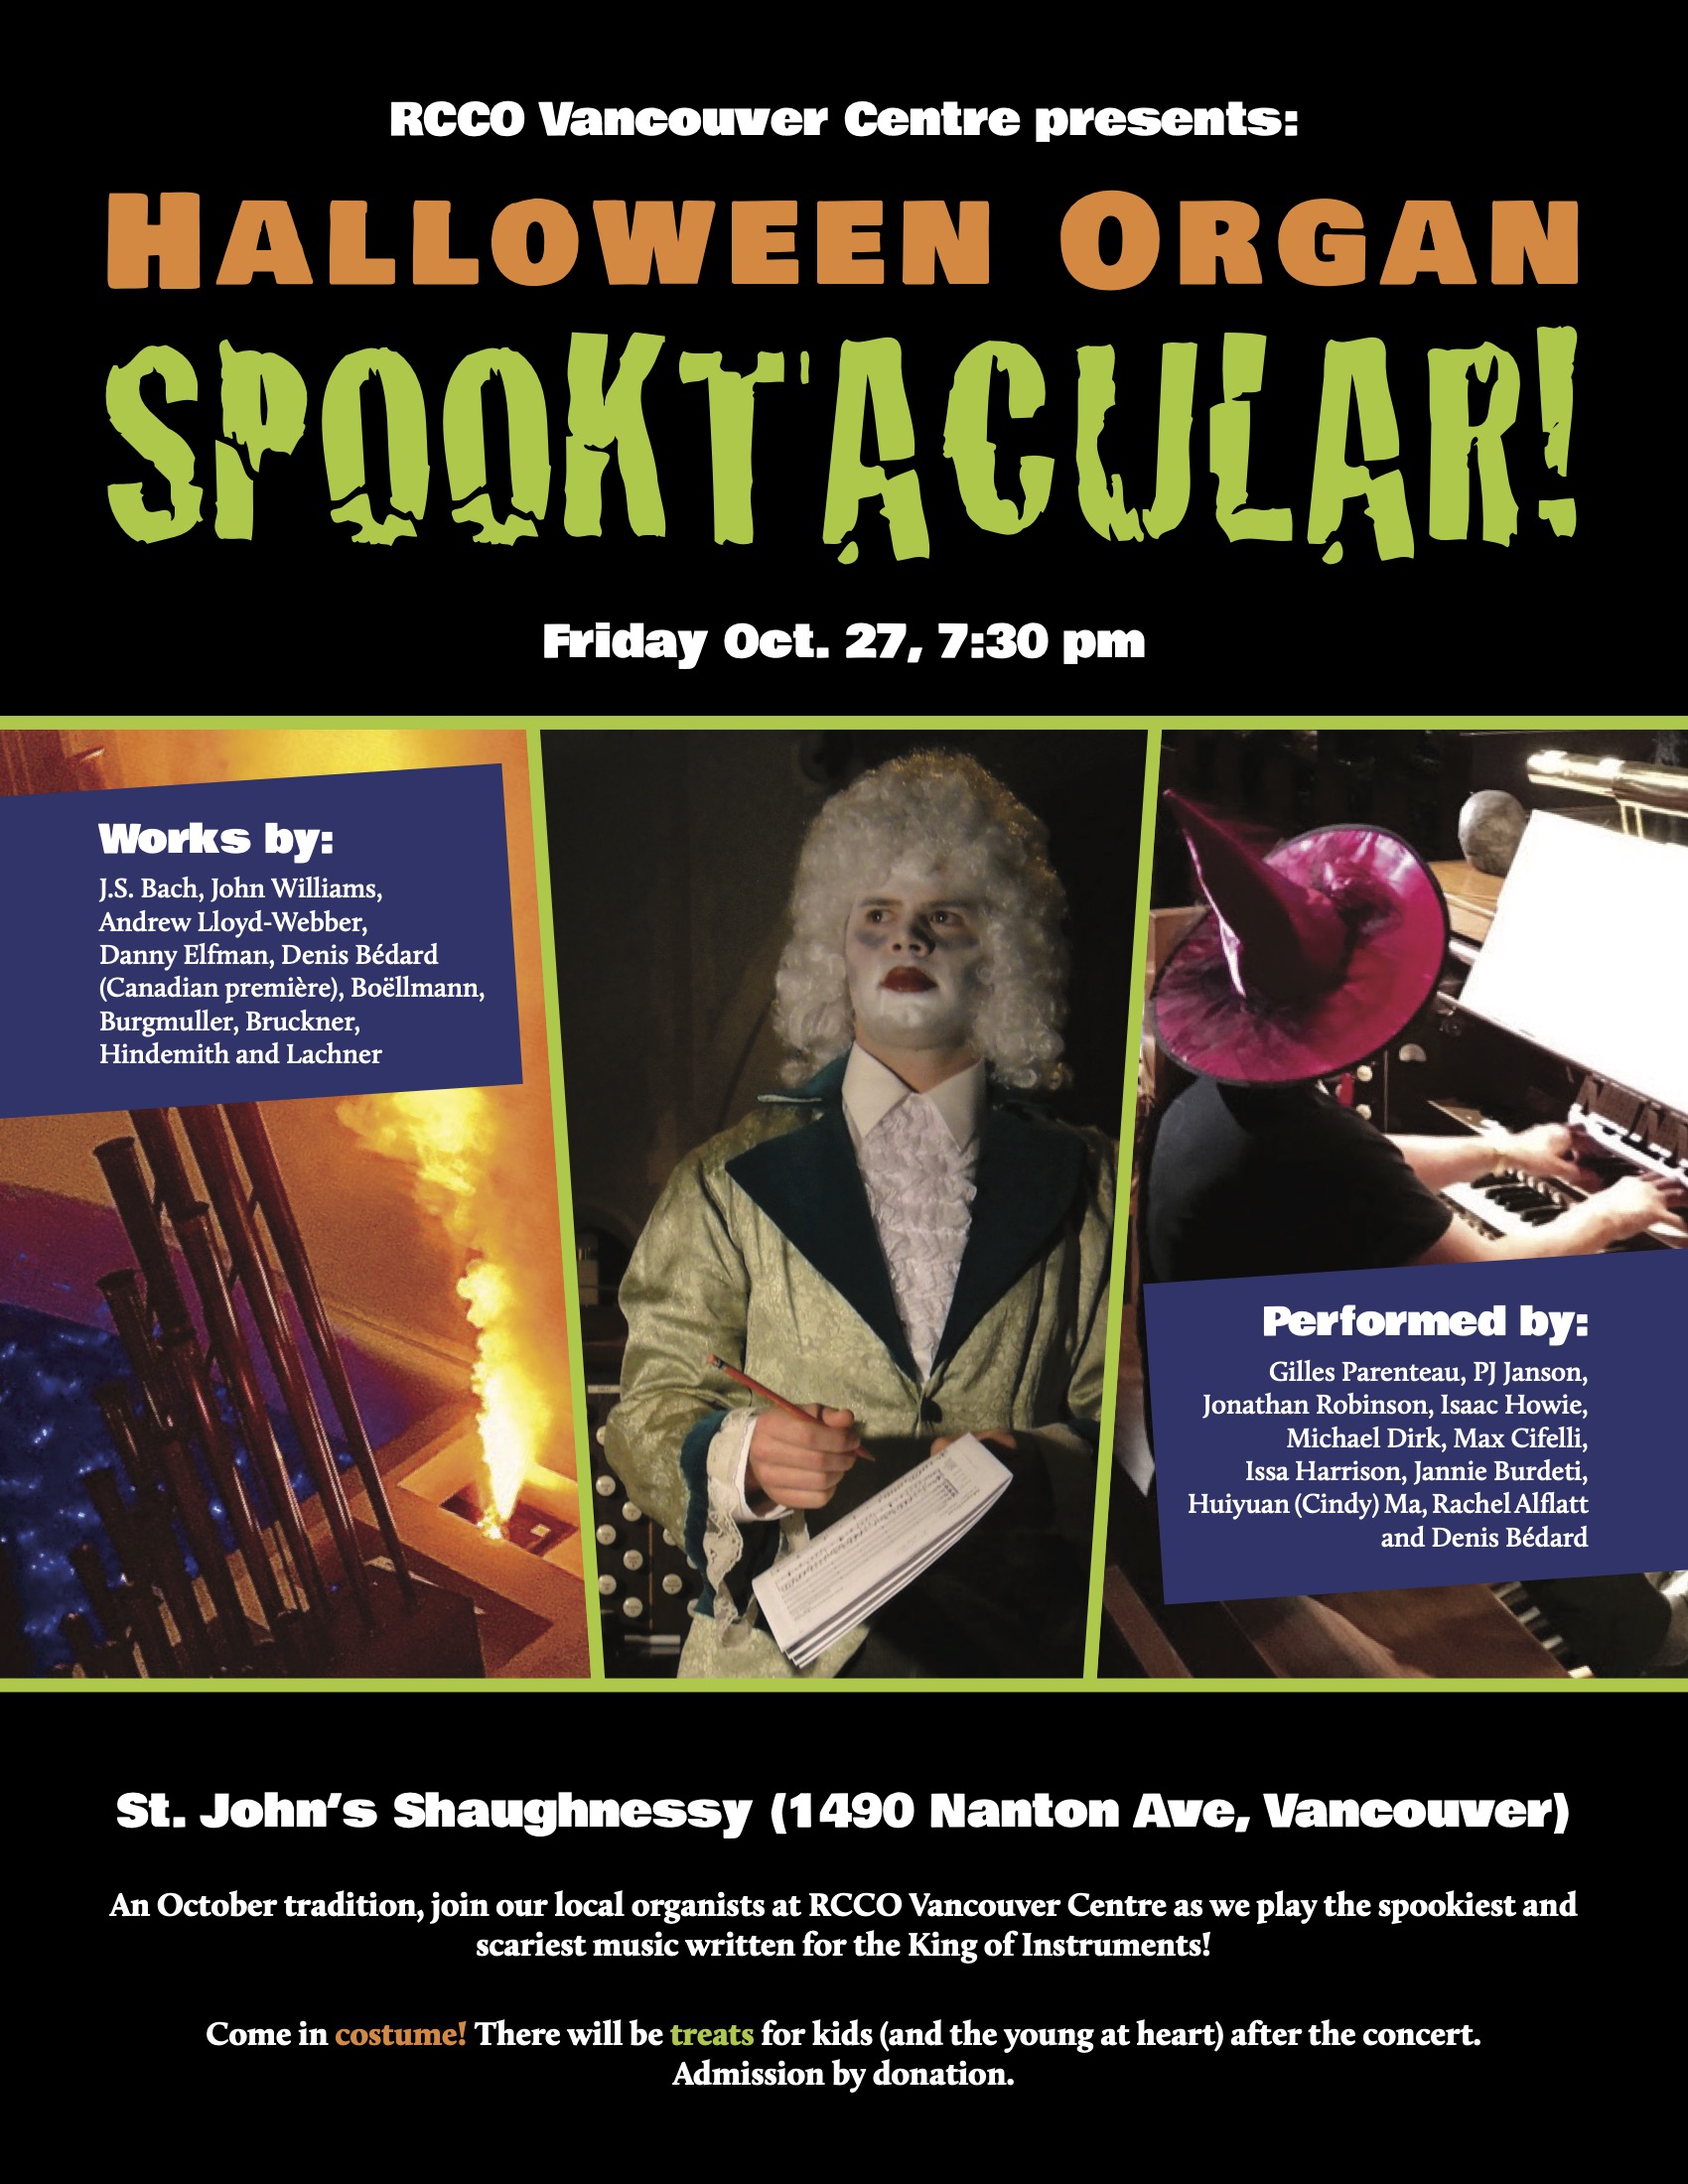 RCCO Vancouver Centre’s 18th Annual Halloween Organ Spooktacular @ St. John's Shaughnessy Anglican Church